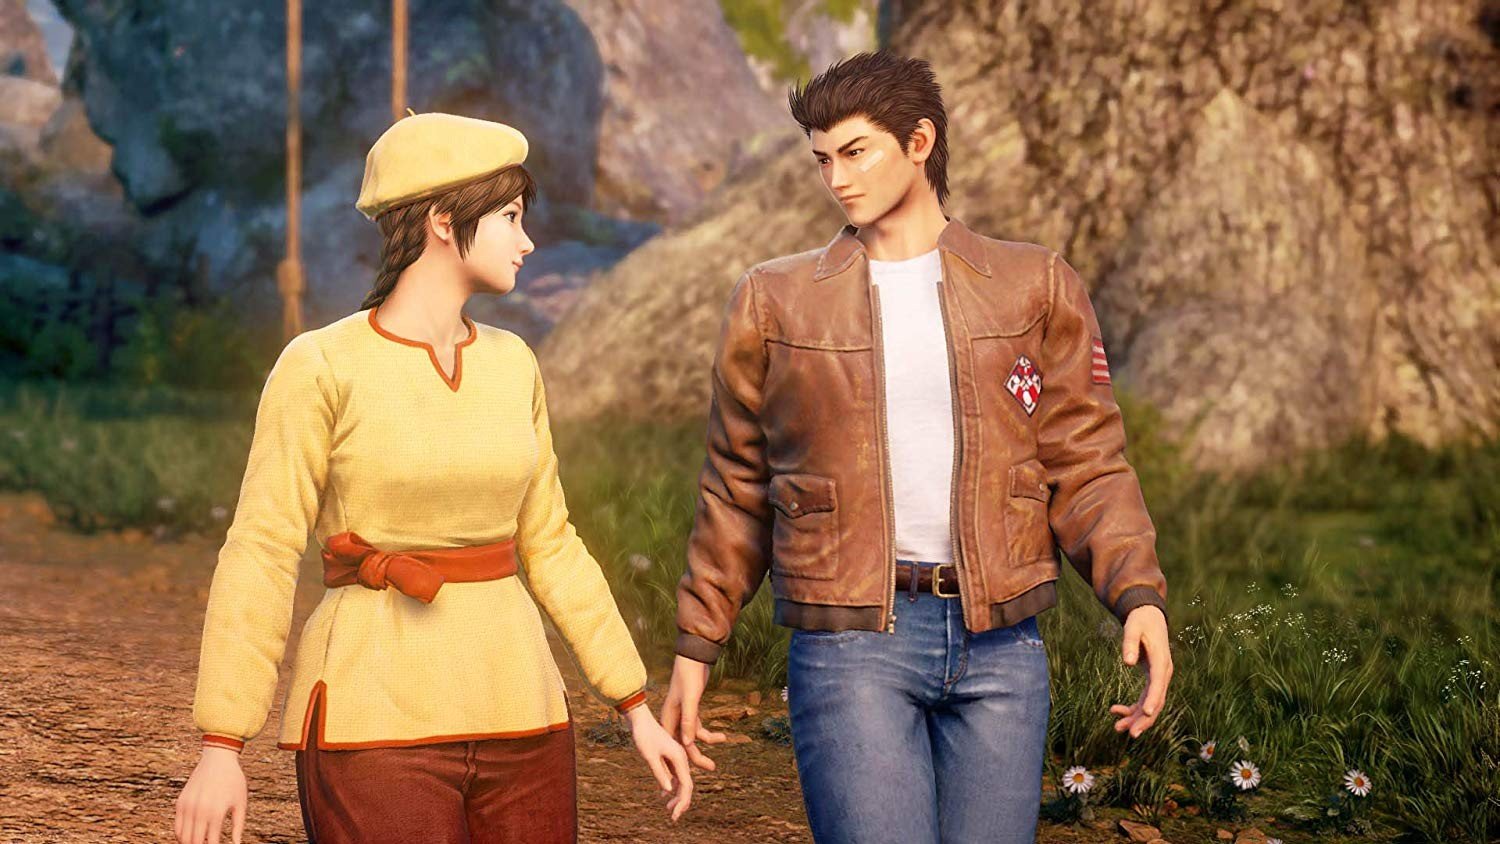 Shenmue III, Shenmue 3, release date, gameplay, trailer, PlayStation 4, Gamescom 2019, game, update, story, new trailer, A day in Shenmue